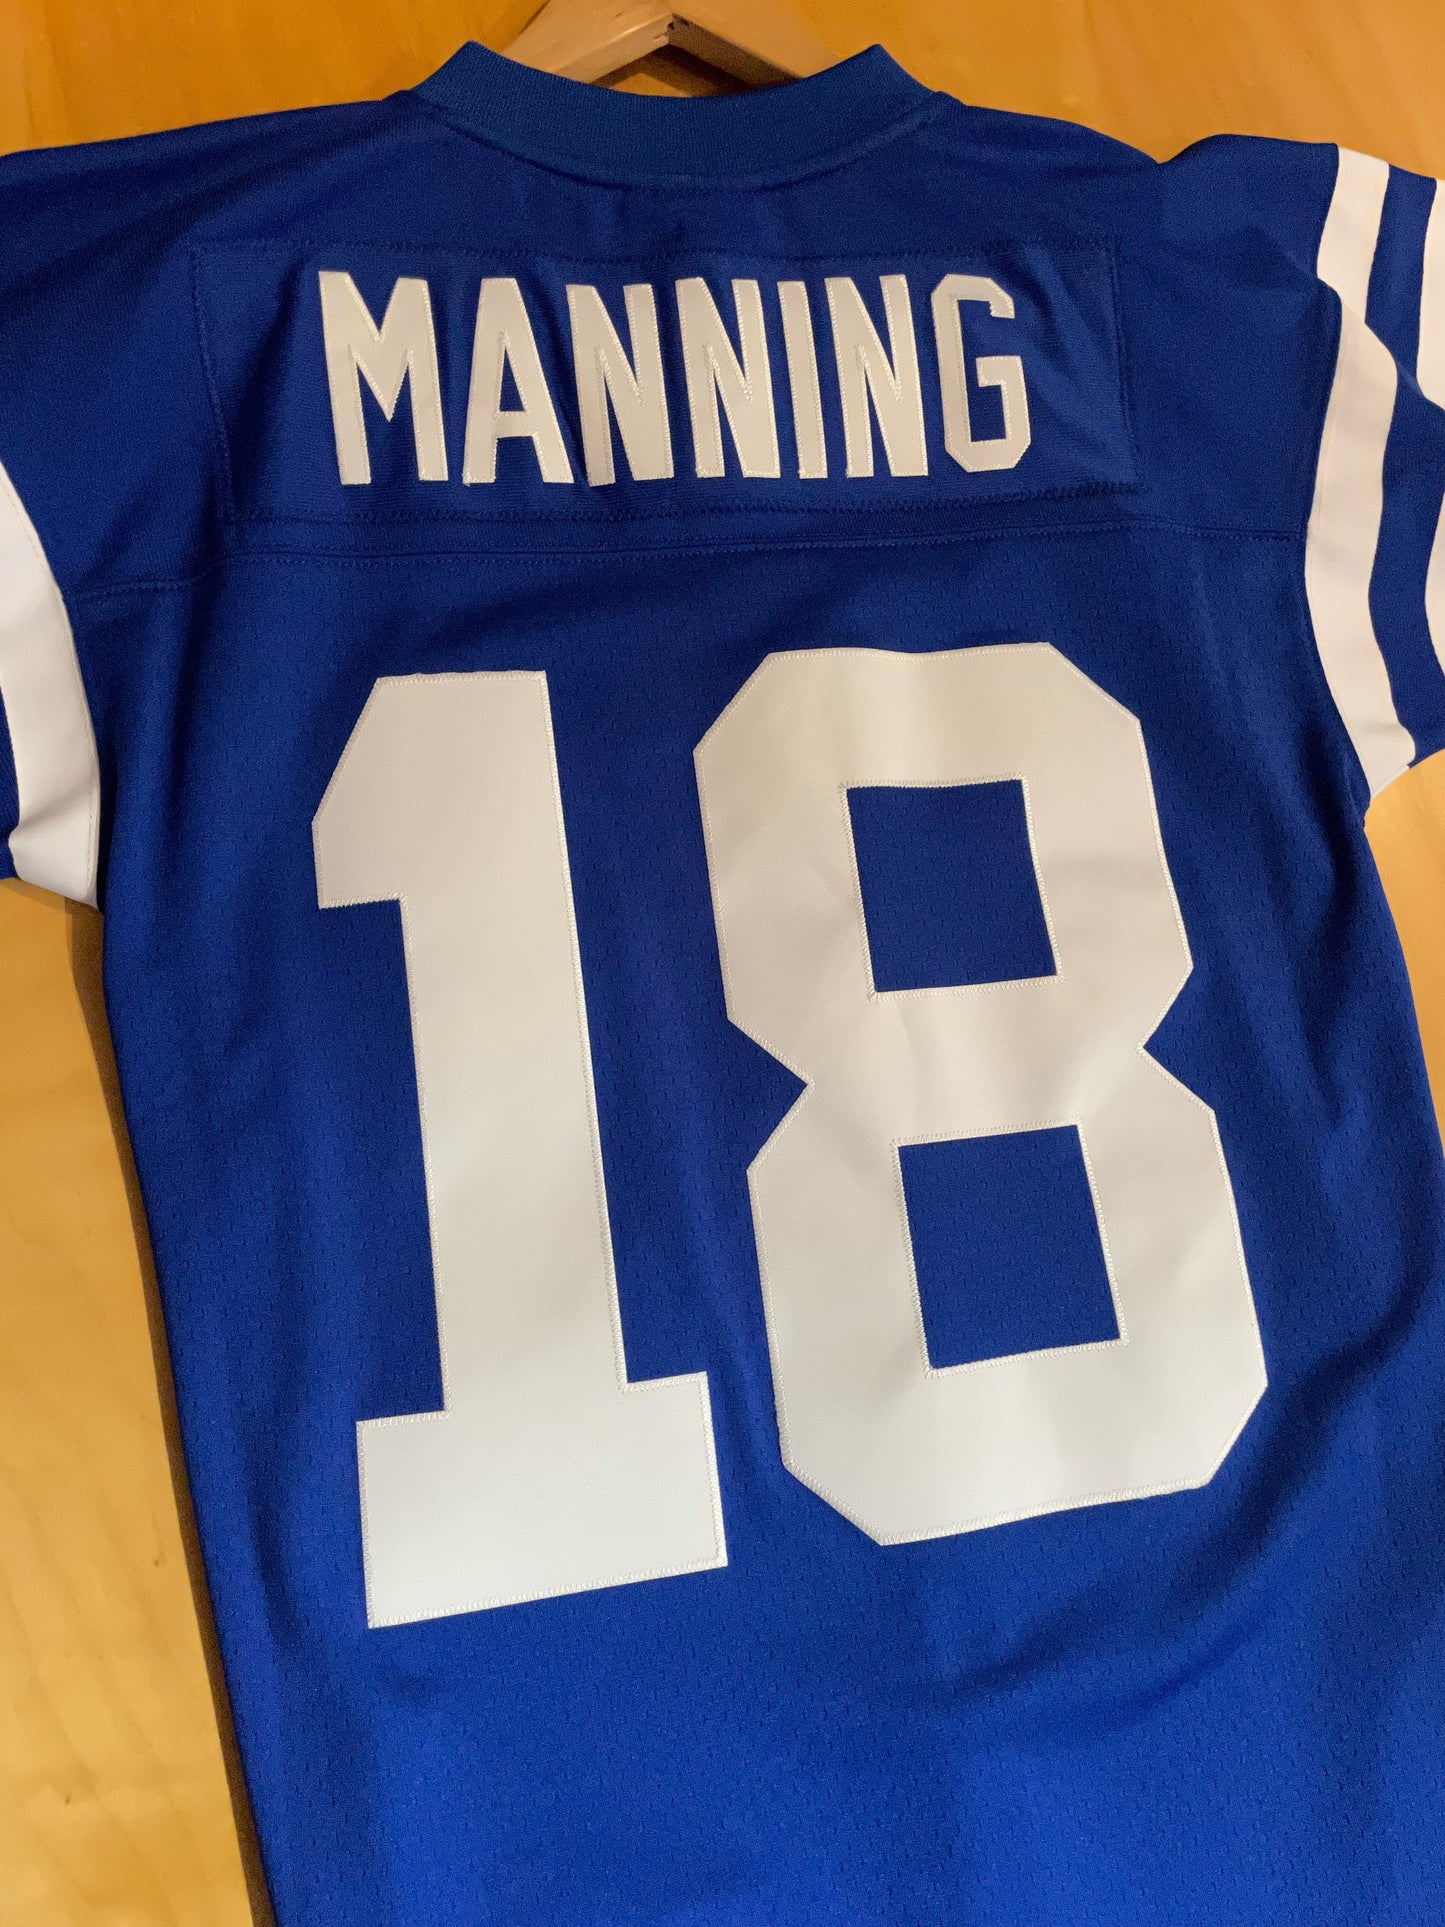 MITCHEL & NESS INDIANAPOLIS COLTS "PEYTON MANNING" NFL FOOTBALL JERSEY  SZ: 36/S